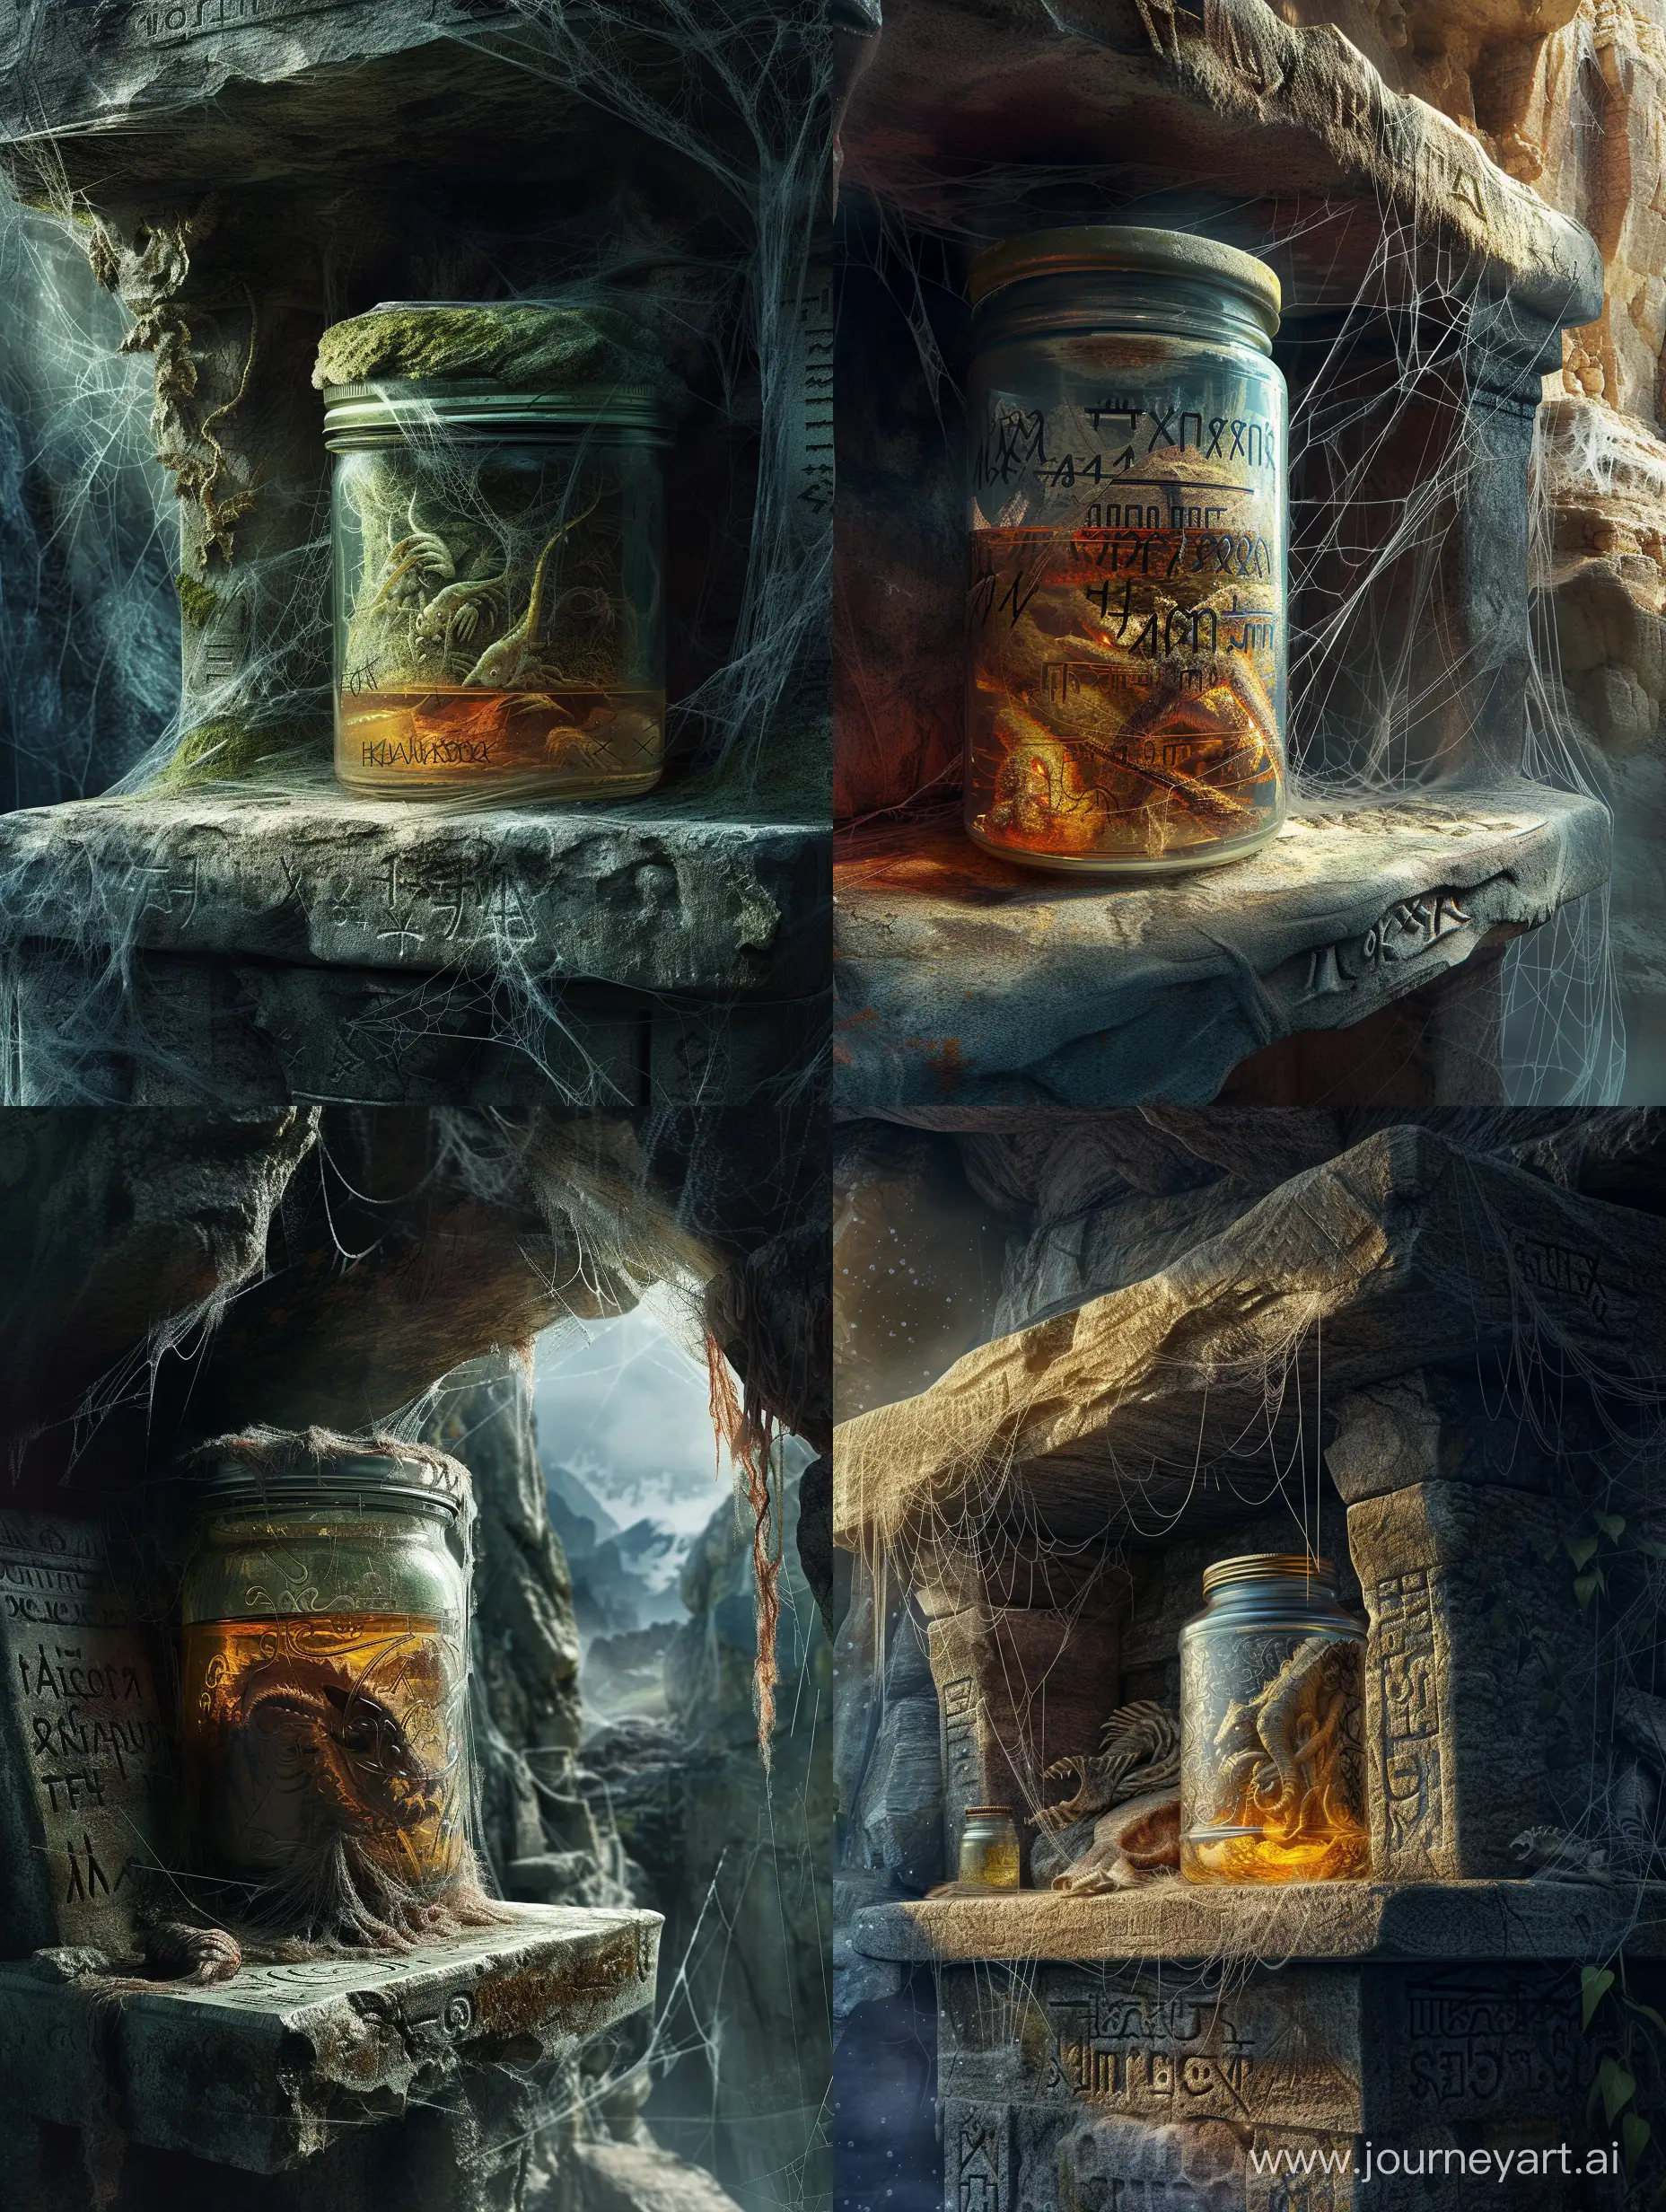 Terrifying-Ancient-World-Dark-Hills-Monsters-in-Jars-and-Runic-Scripts